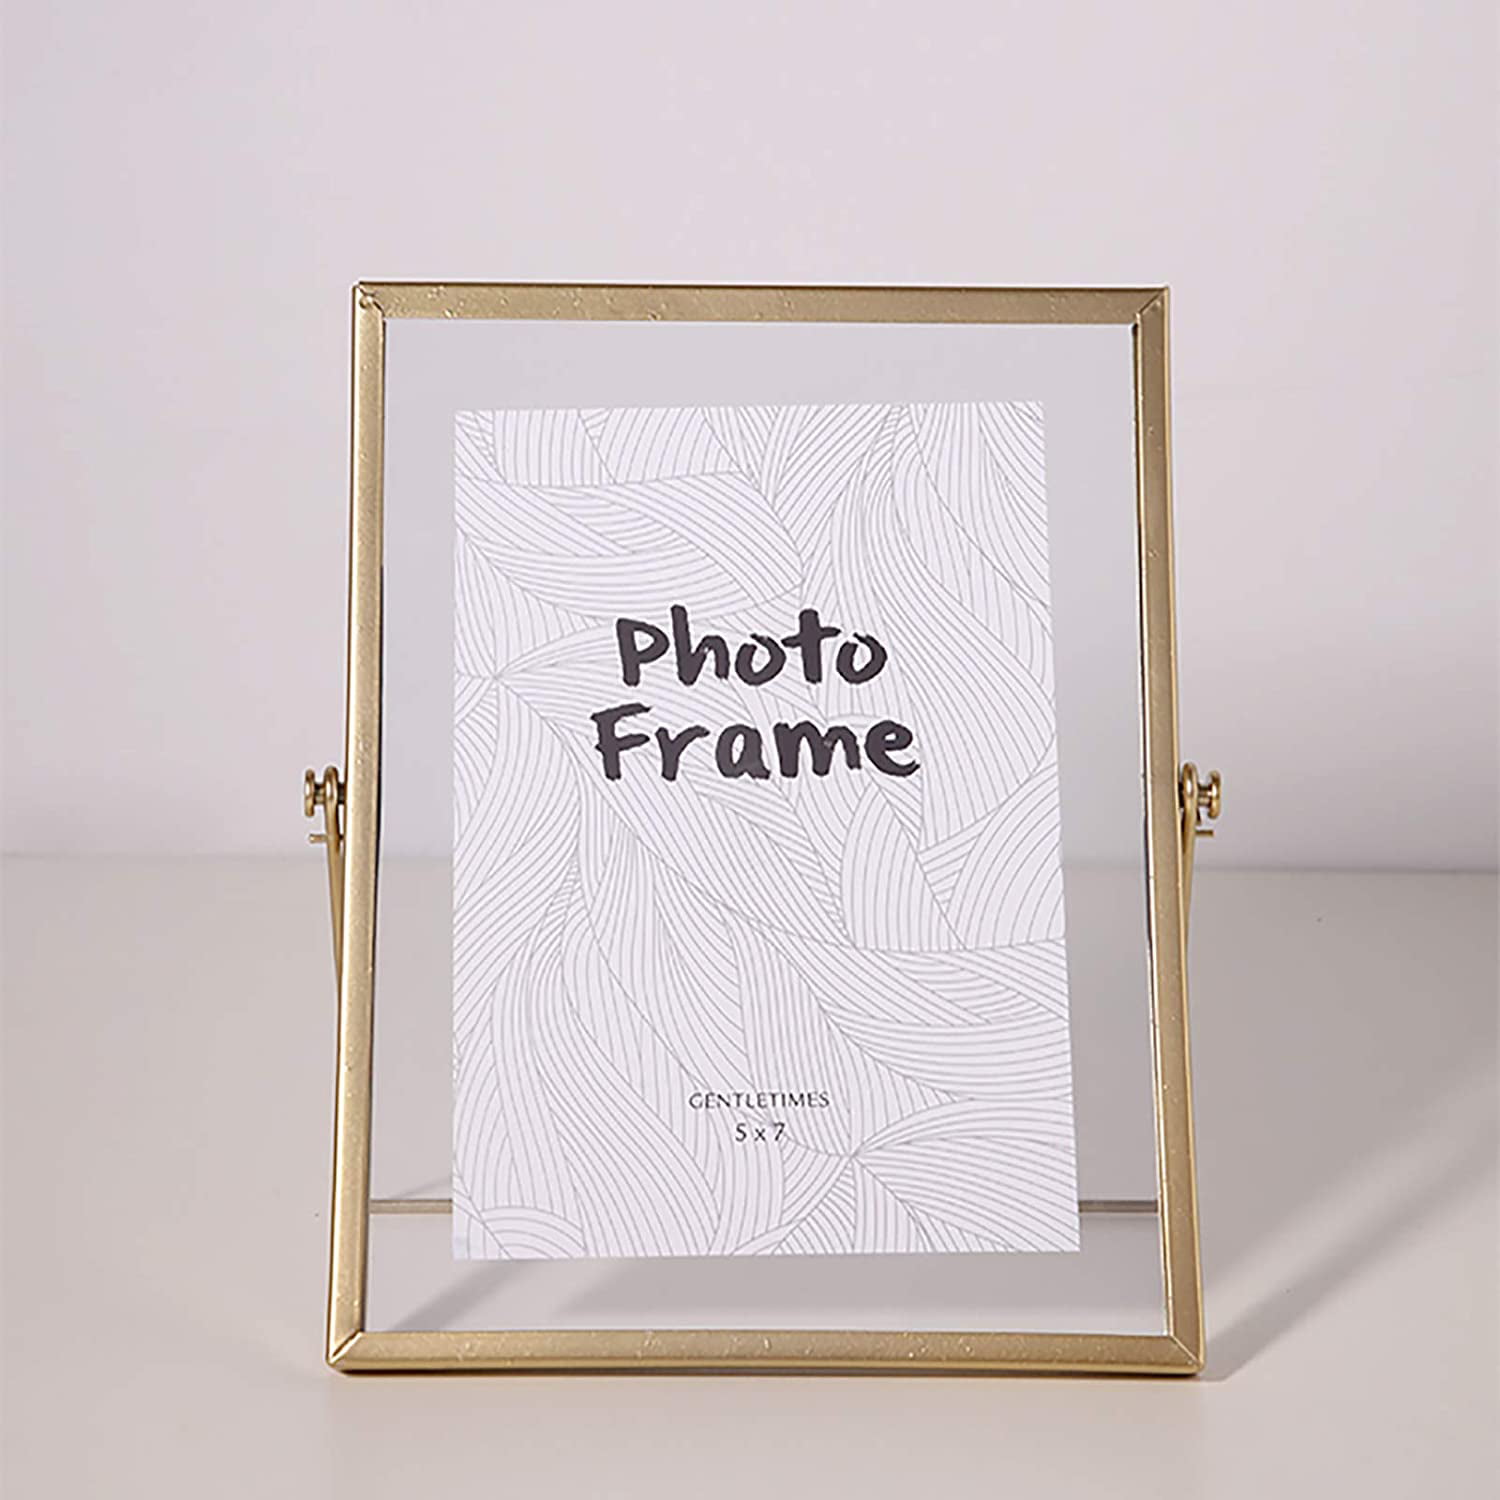 5x7 Silver Photo Frame Glass Metal Standing Picture Desk Display 